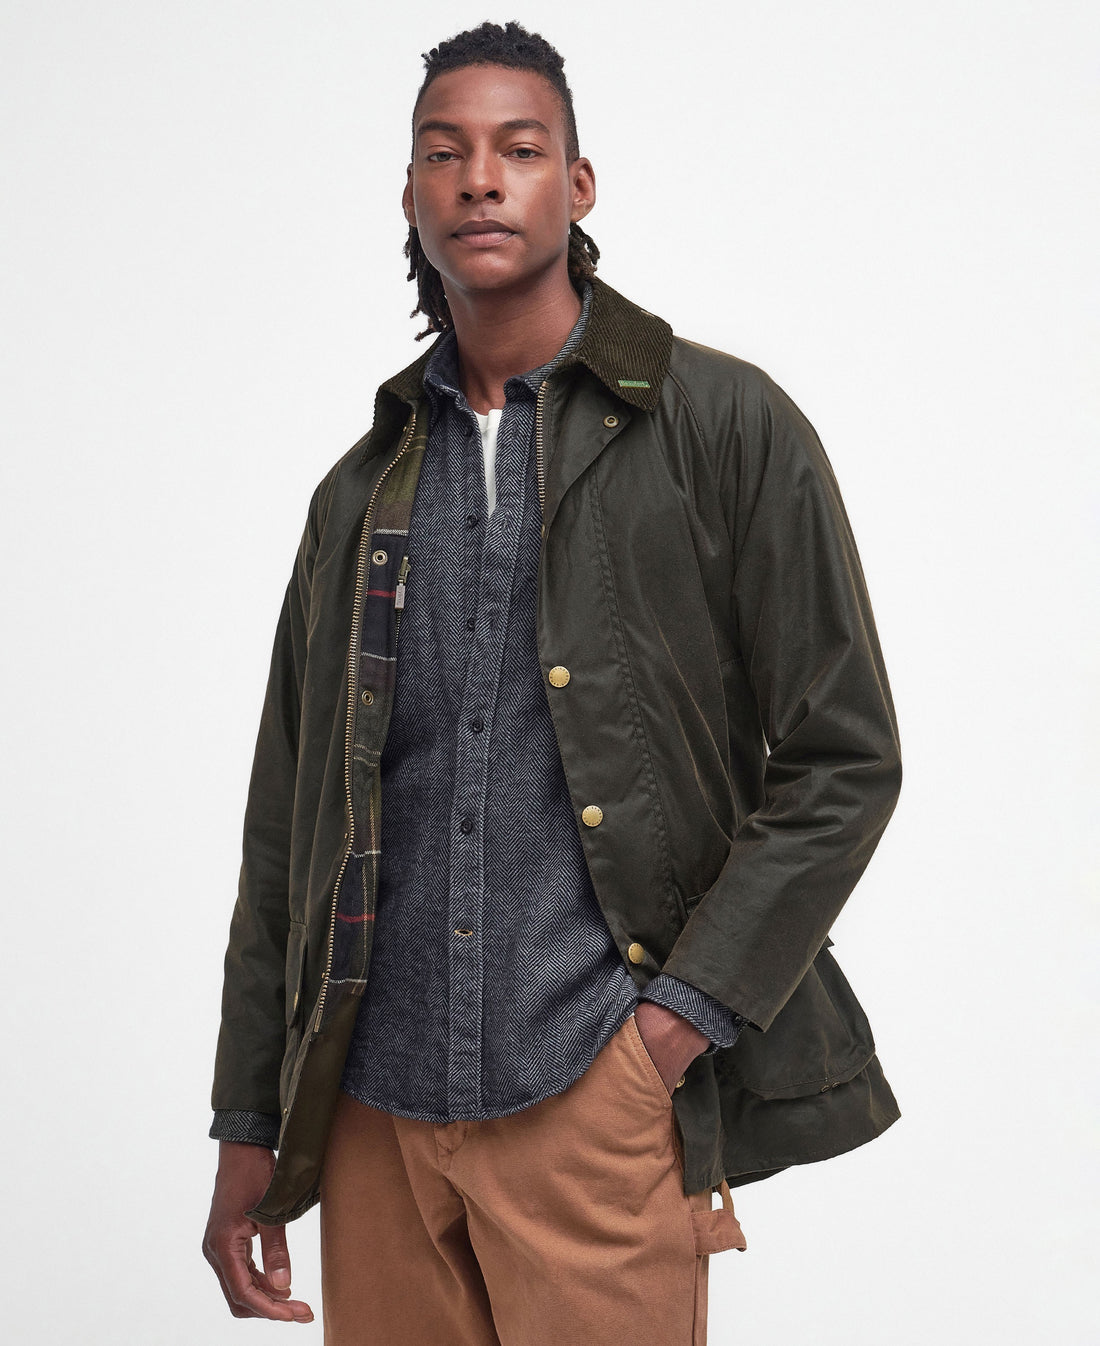 40th Anniversary Beaufort Jacket - Olive